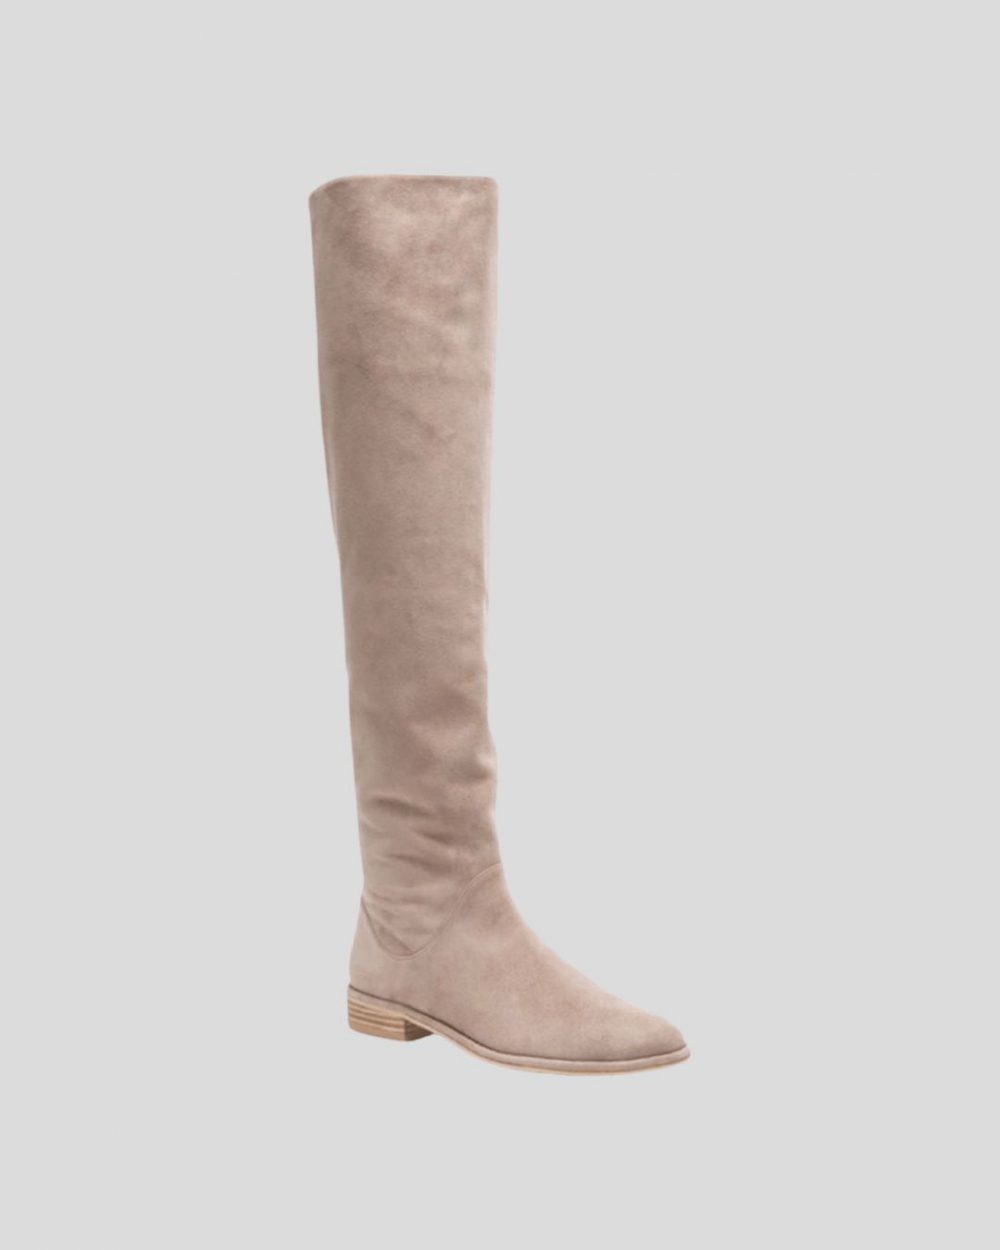 ROCKER-CHIC-SLOUCHY-BOOTS-ONROTATE